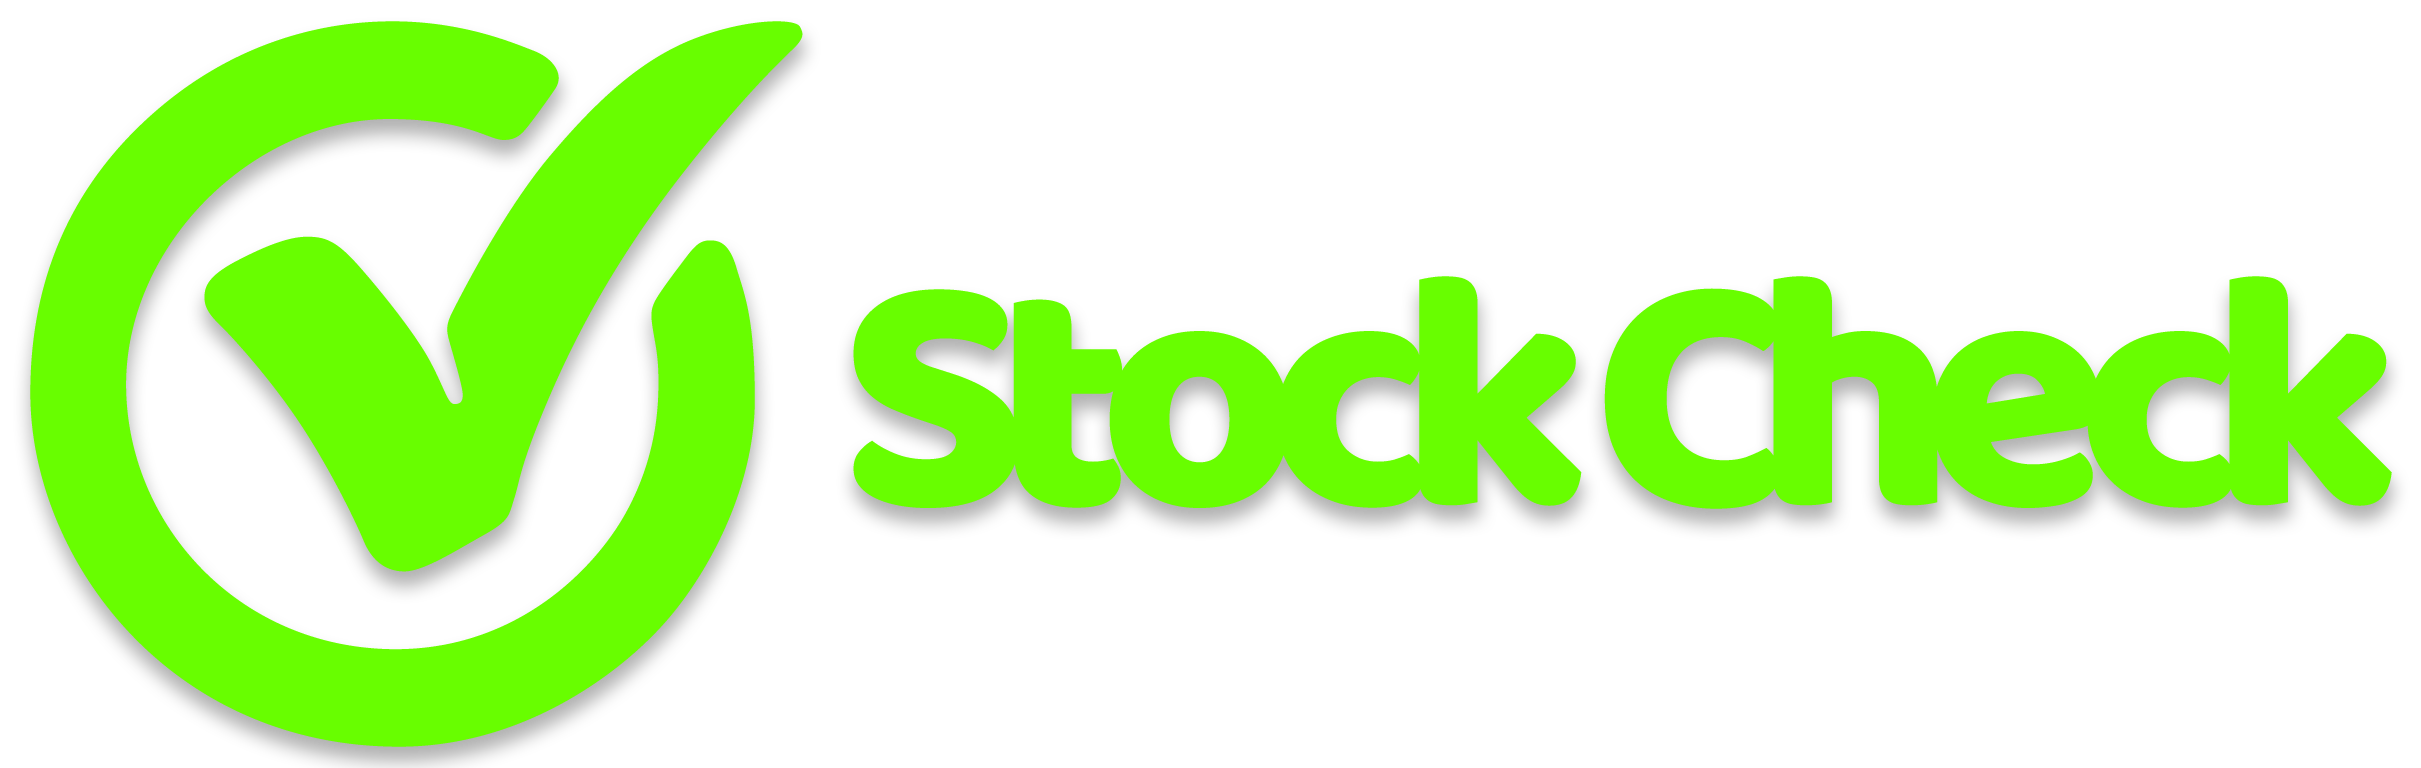 Get a stock check here!